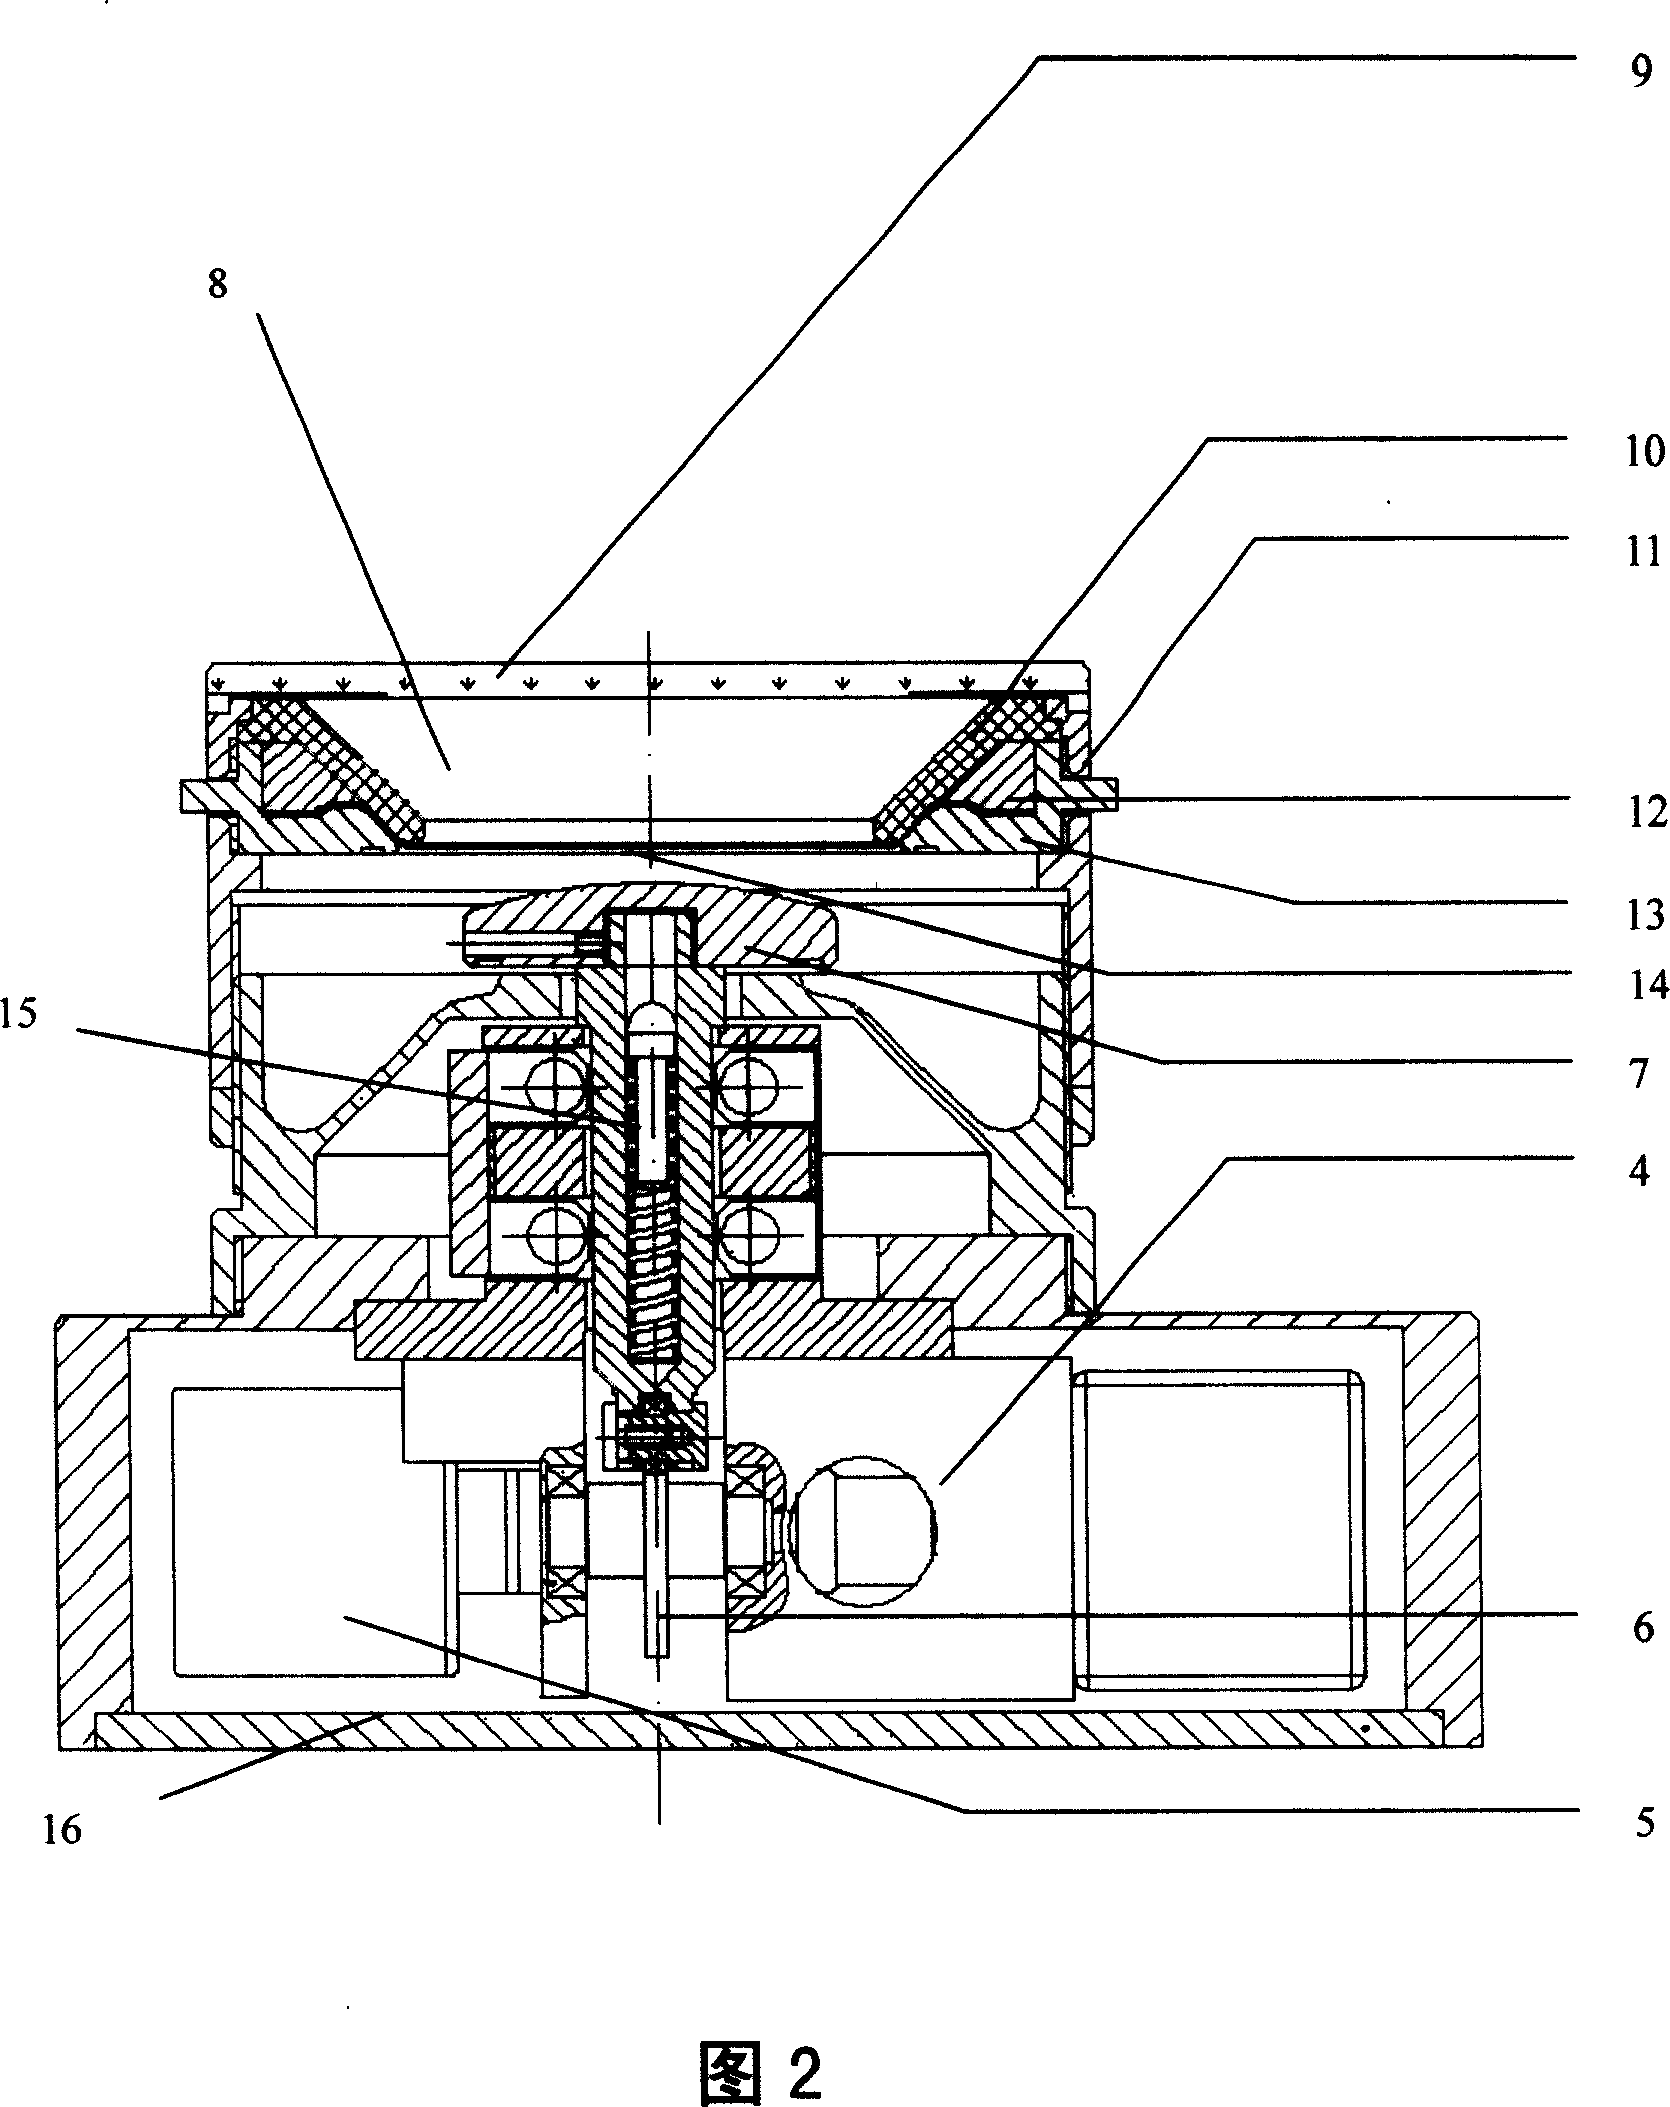 Experimental apparatus for loading cell through digital controlled mechanical strain